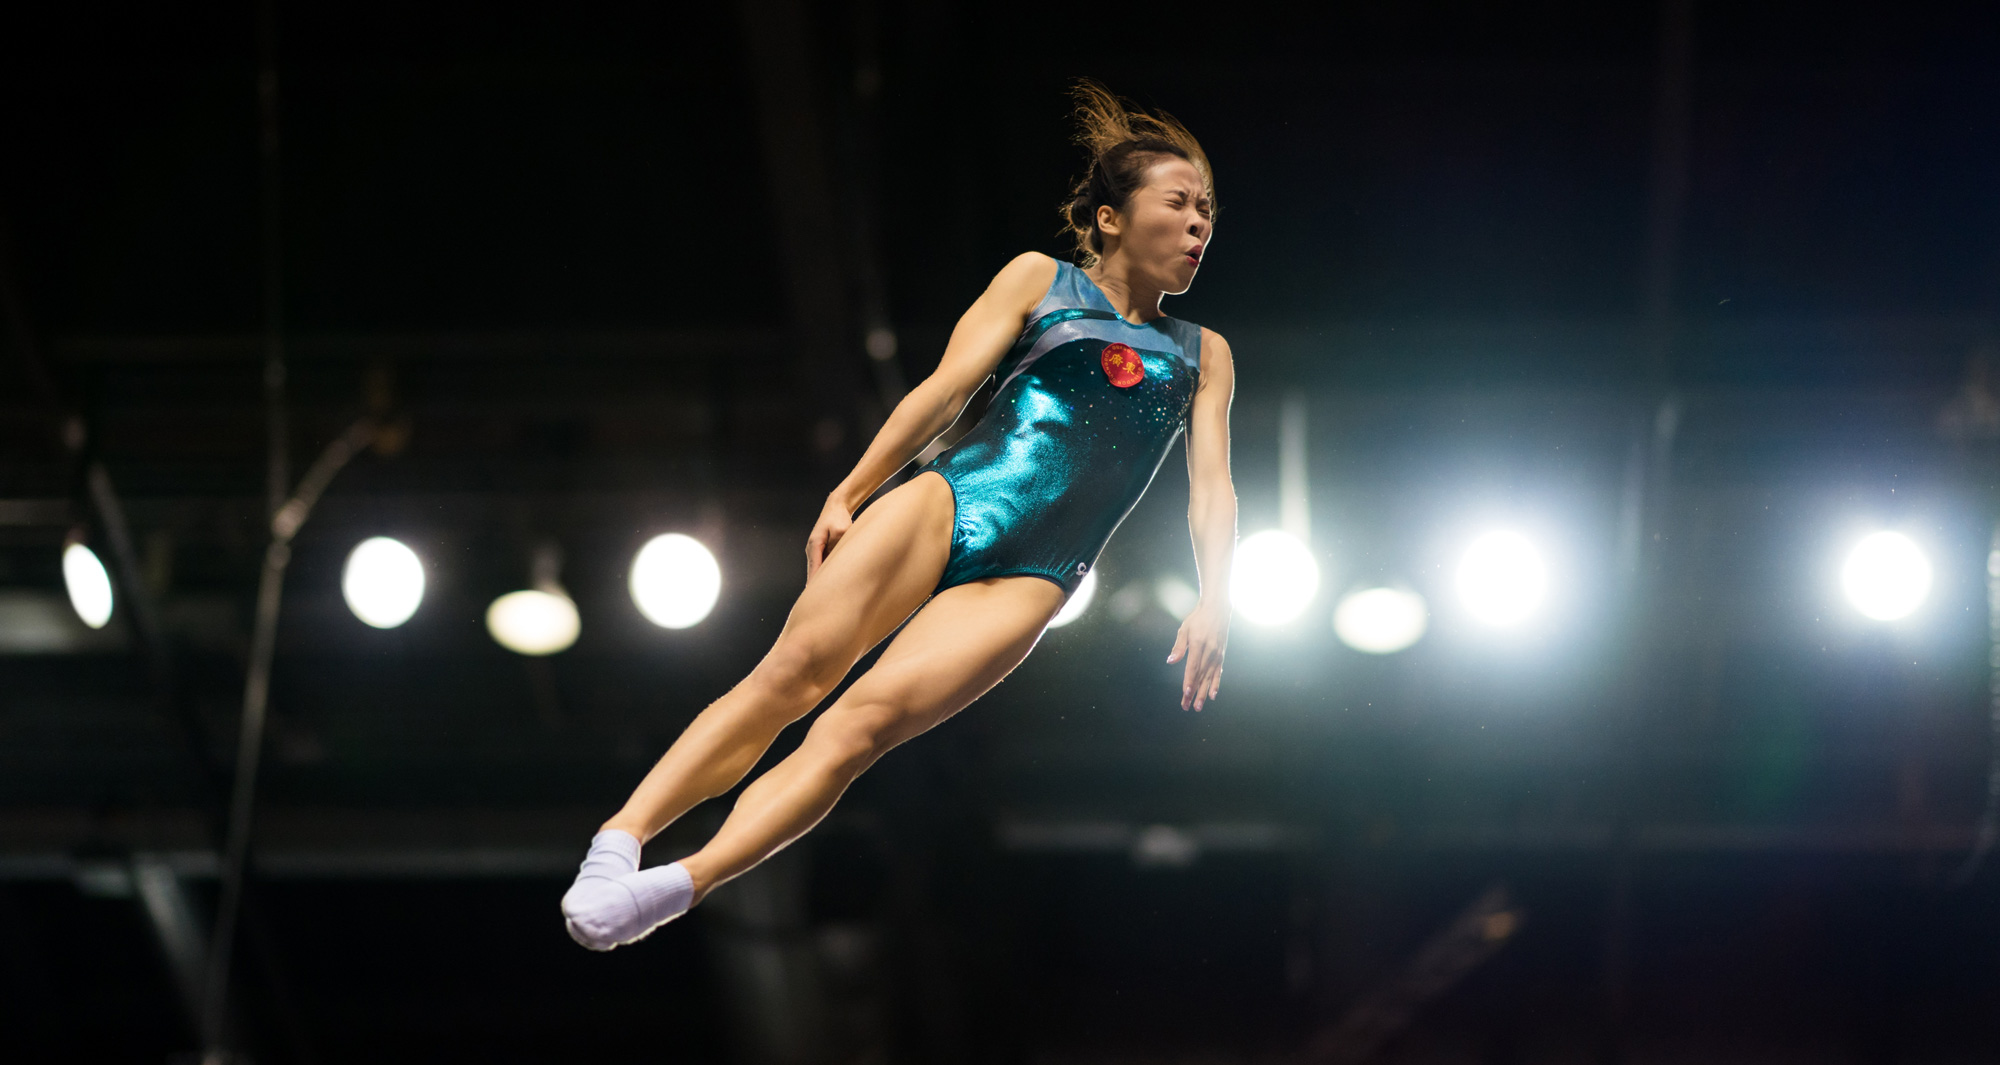 terry-donnelly-sony-alpha-9-gymnast-leaps-in-the-air-with-her-eyes-closed.jpeg